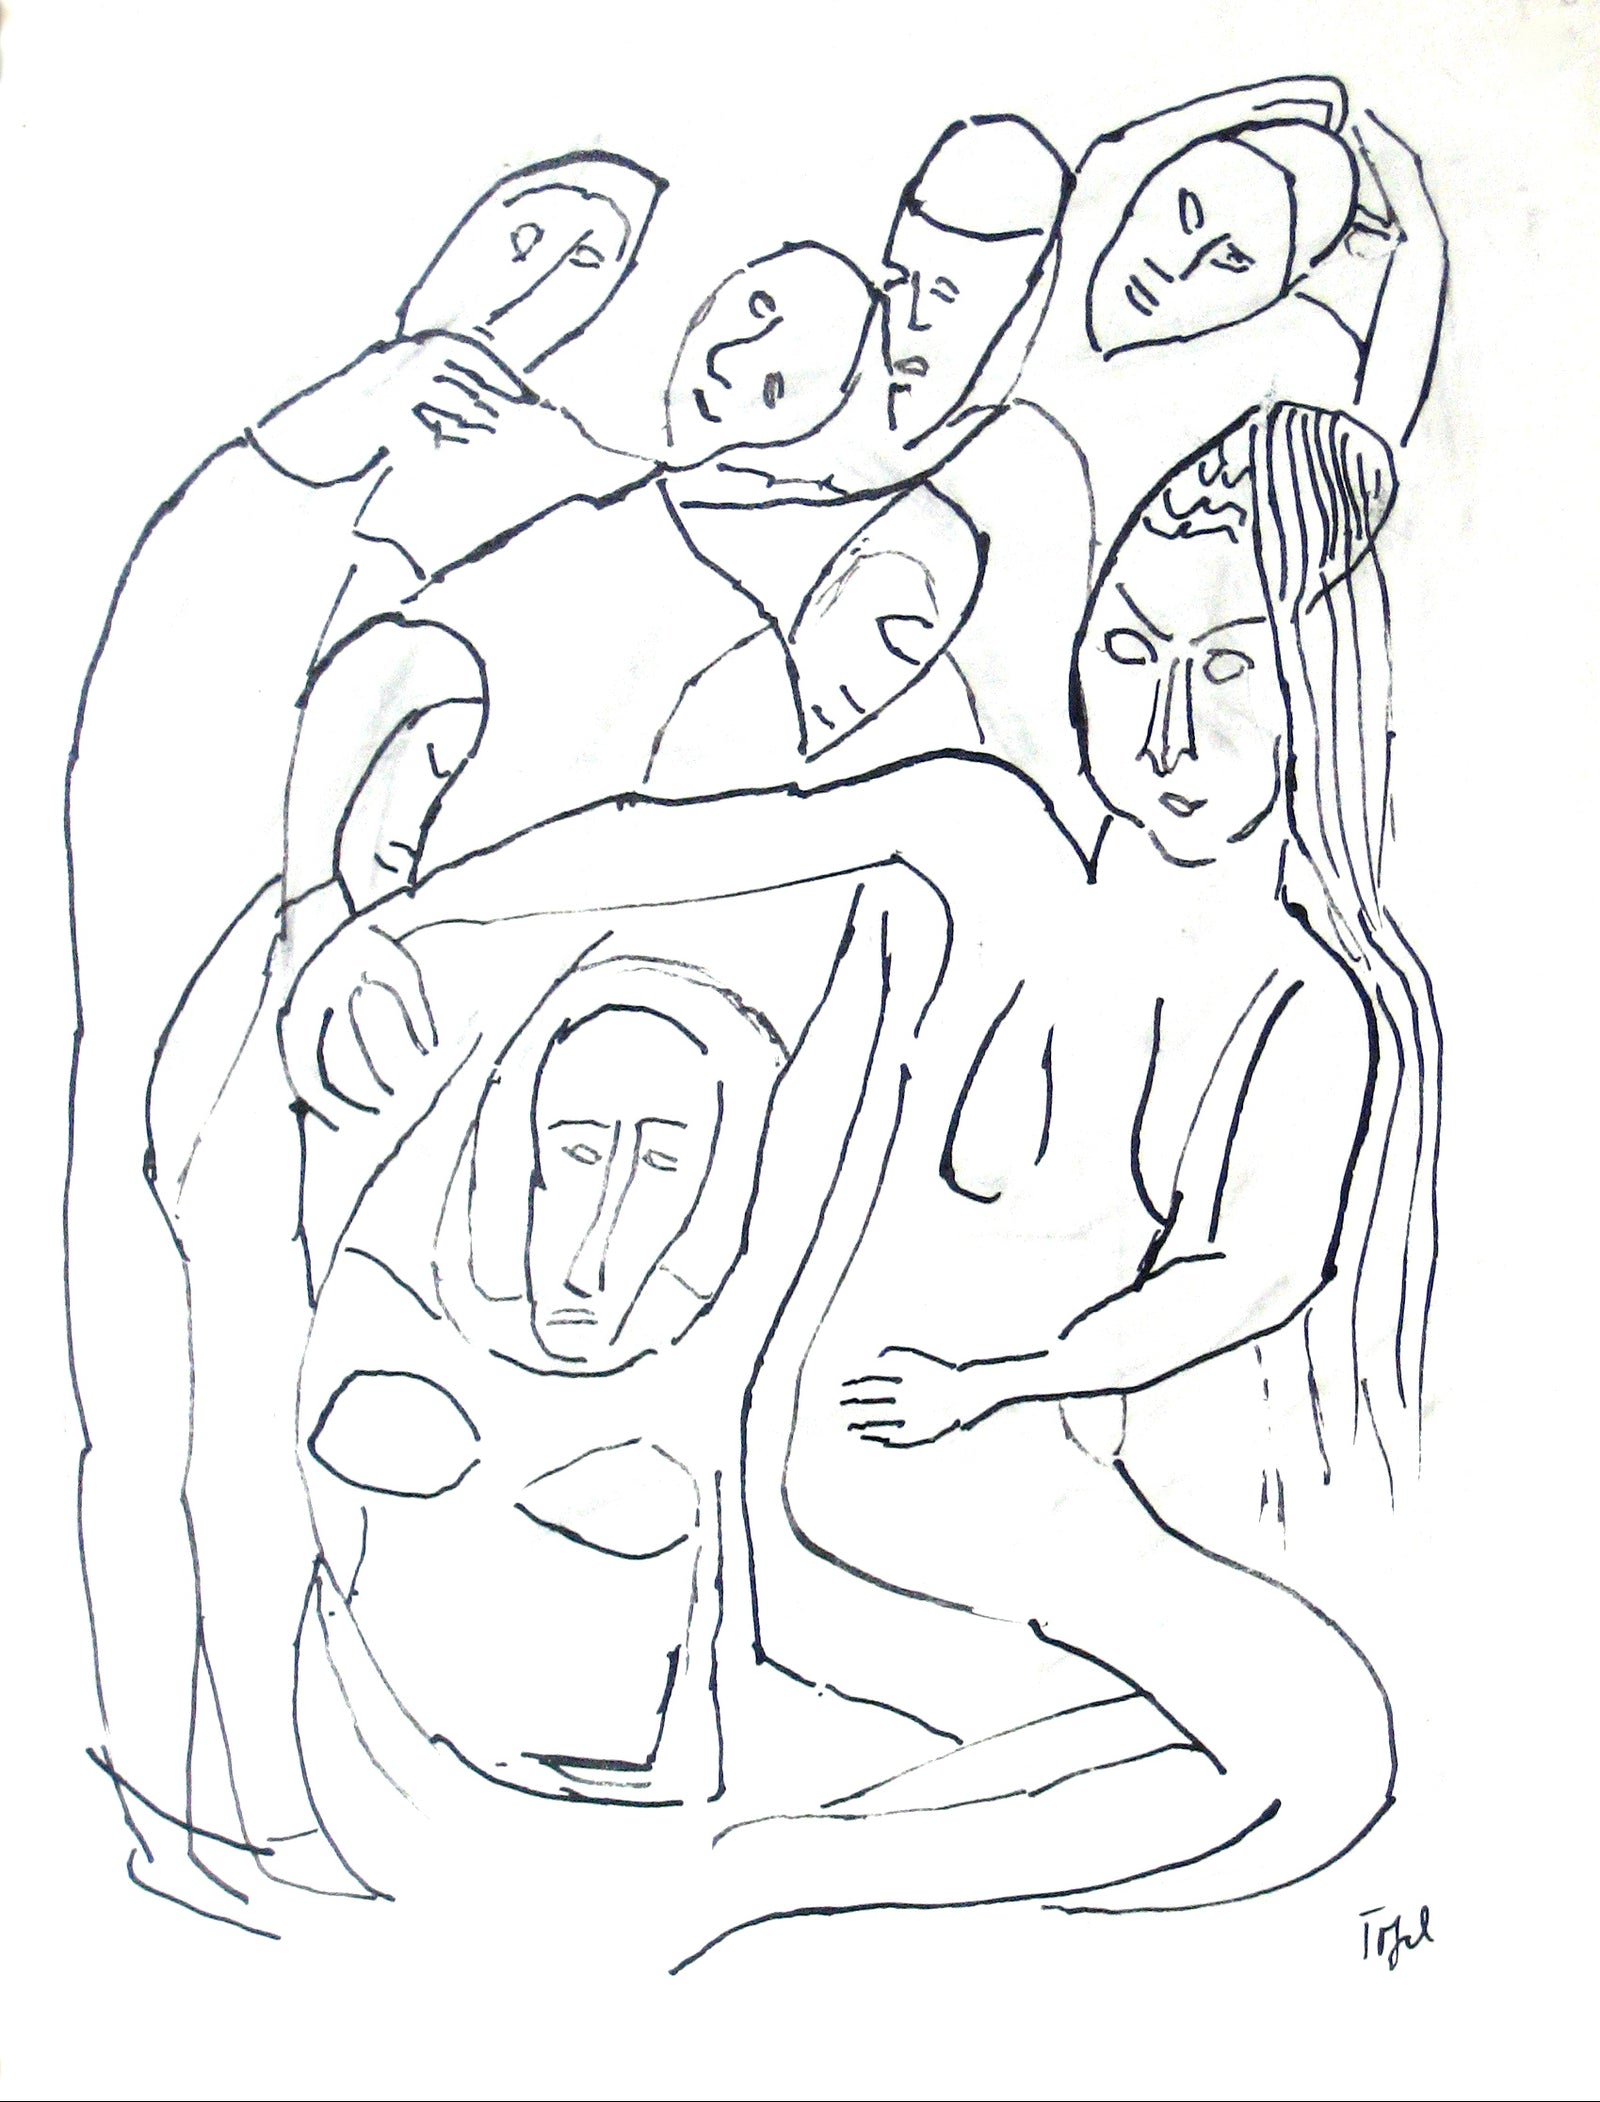 Abstracted Huddled Figures<br>Early-Mid 20th Century Ink<br><br>#13569